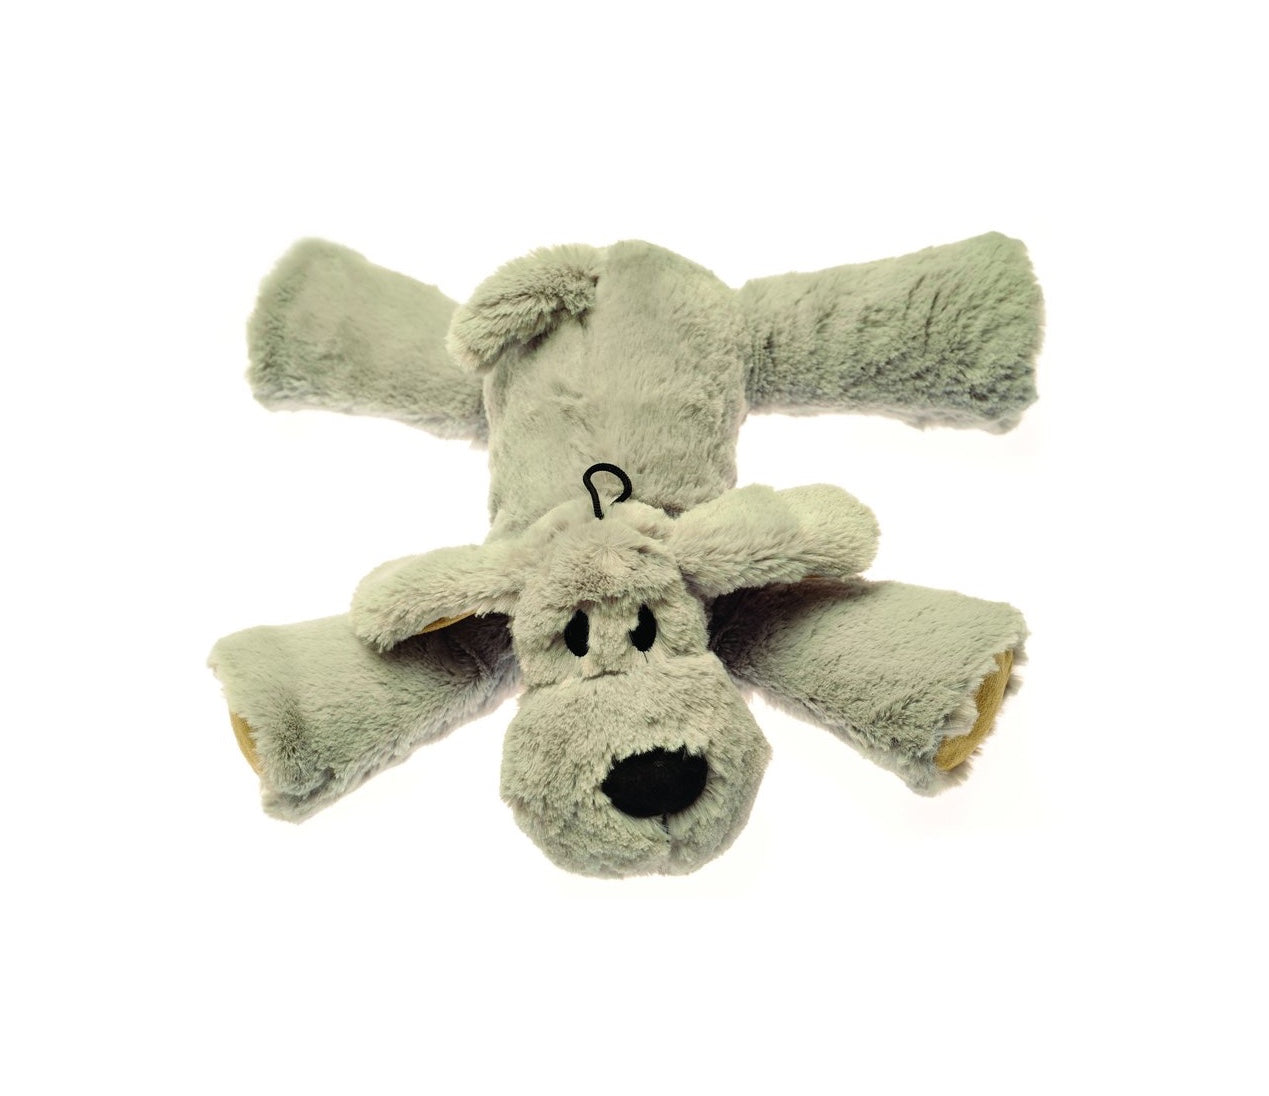 Big Paws Dog Toy by House of Paws 